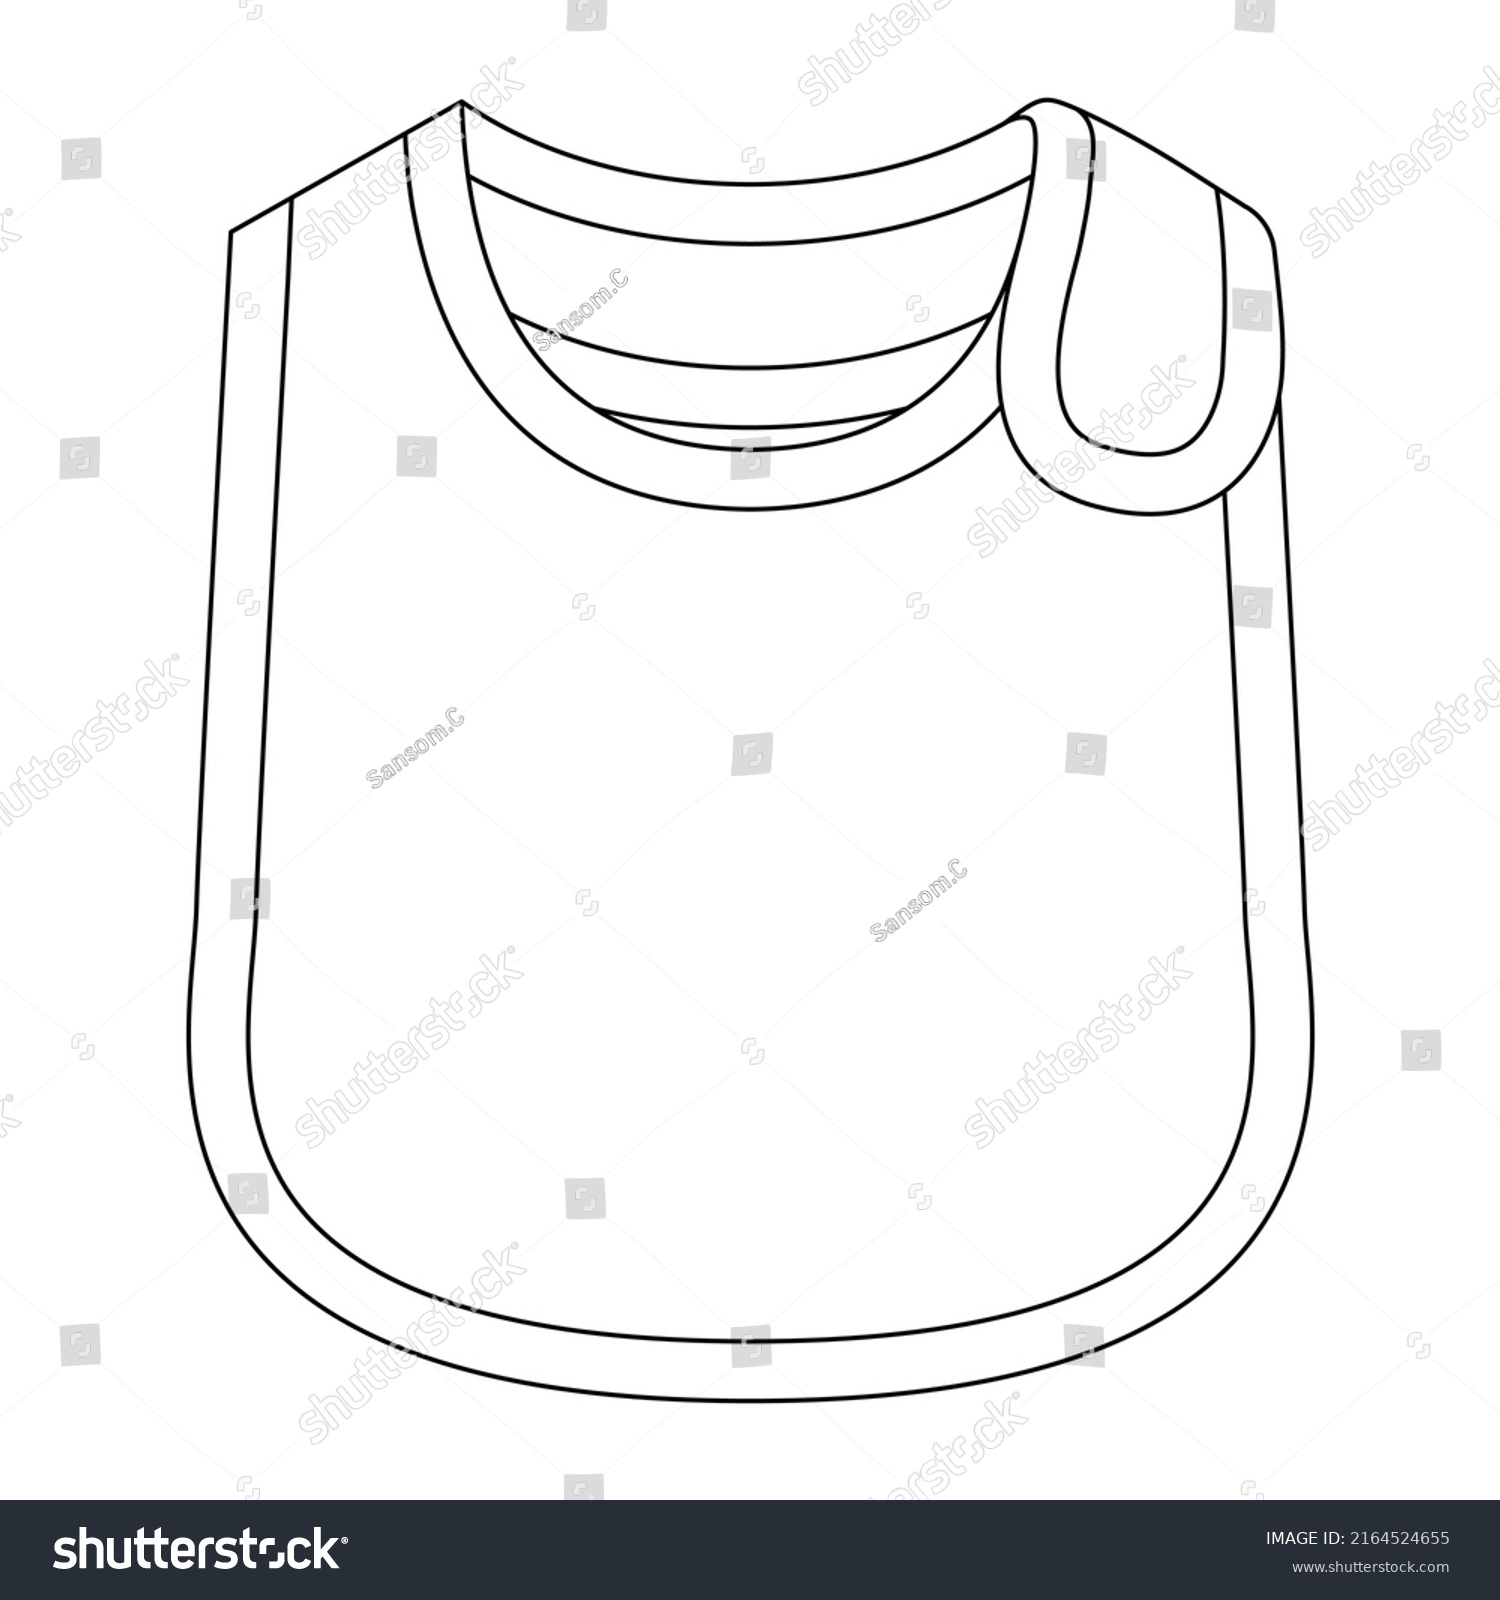 SVG of White Baby Bib Template On White Background, Vector File. svg